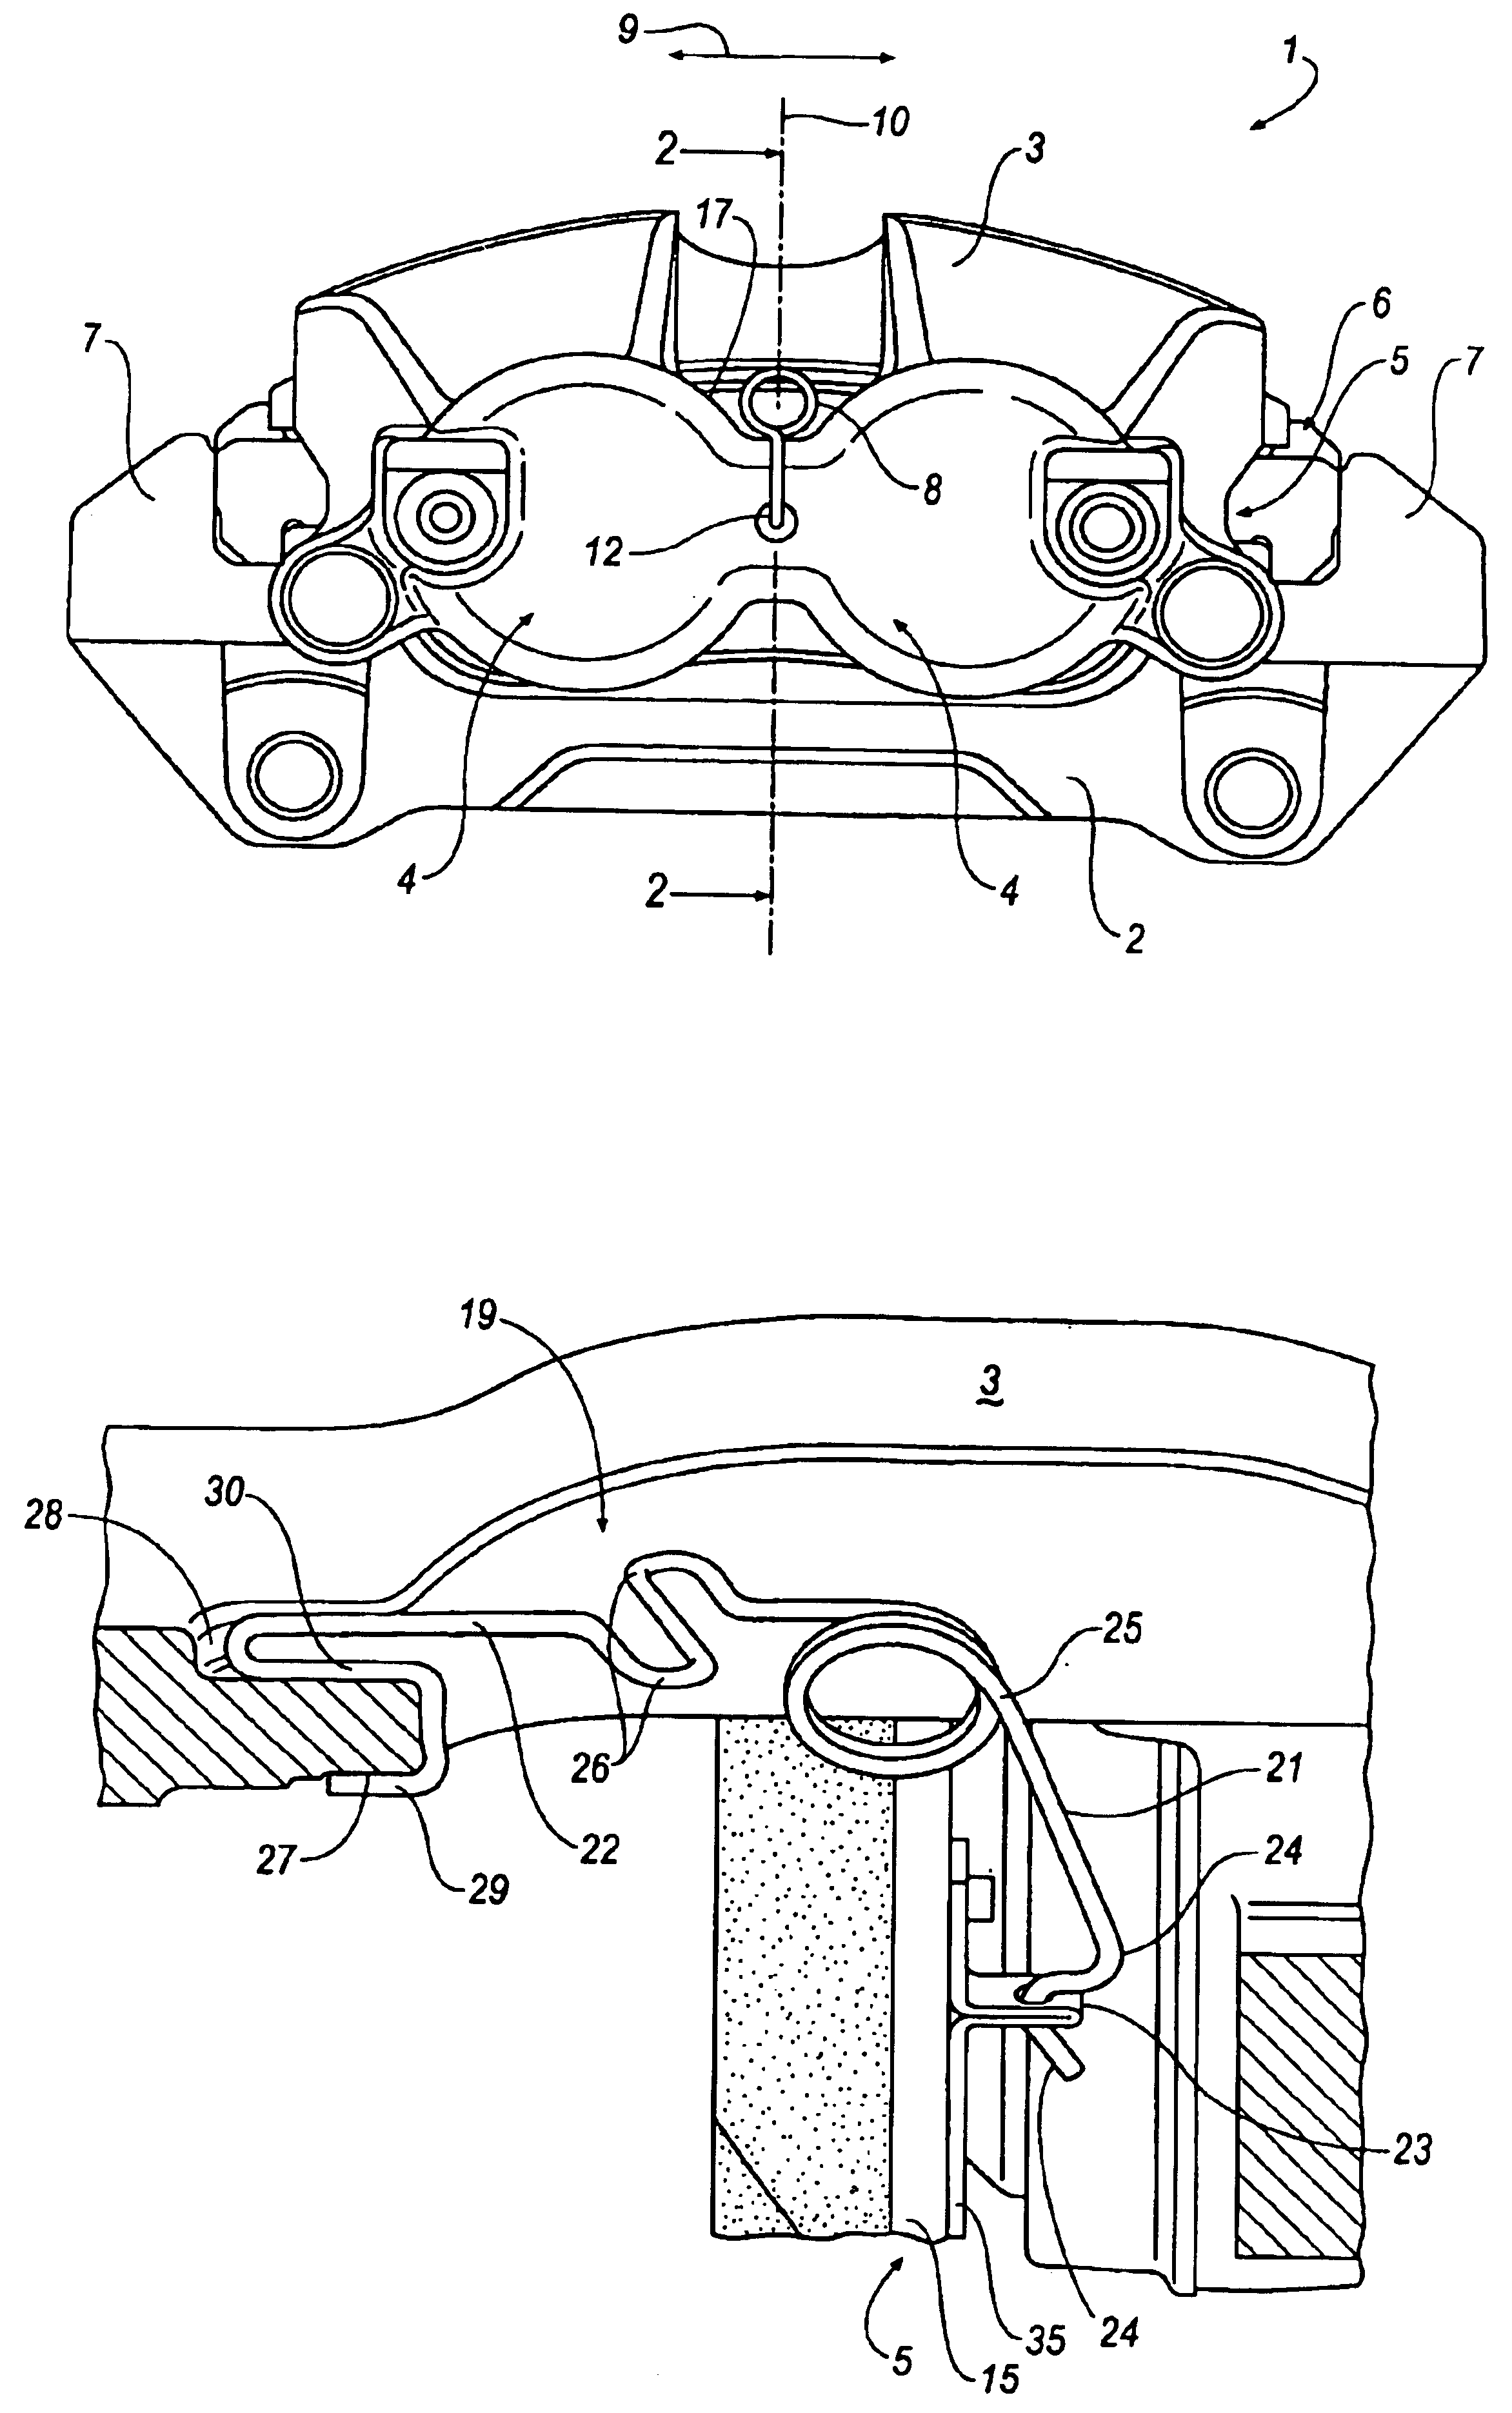 Spot-type disc brake with a spring assembly for a brake pad